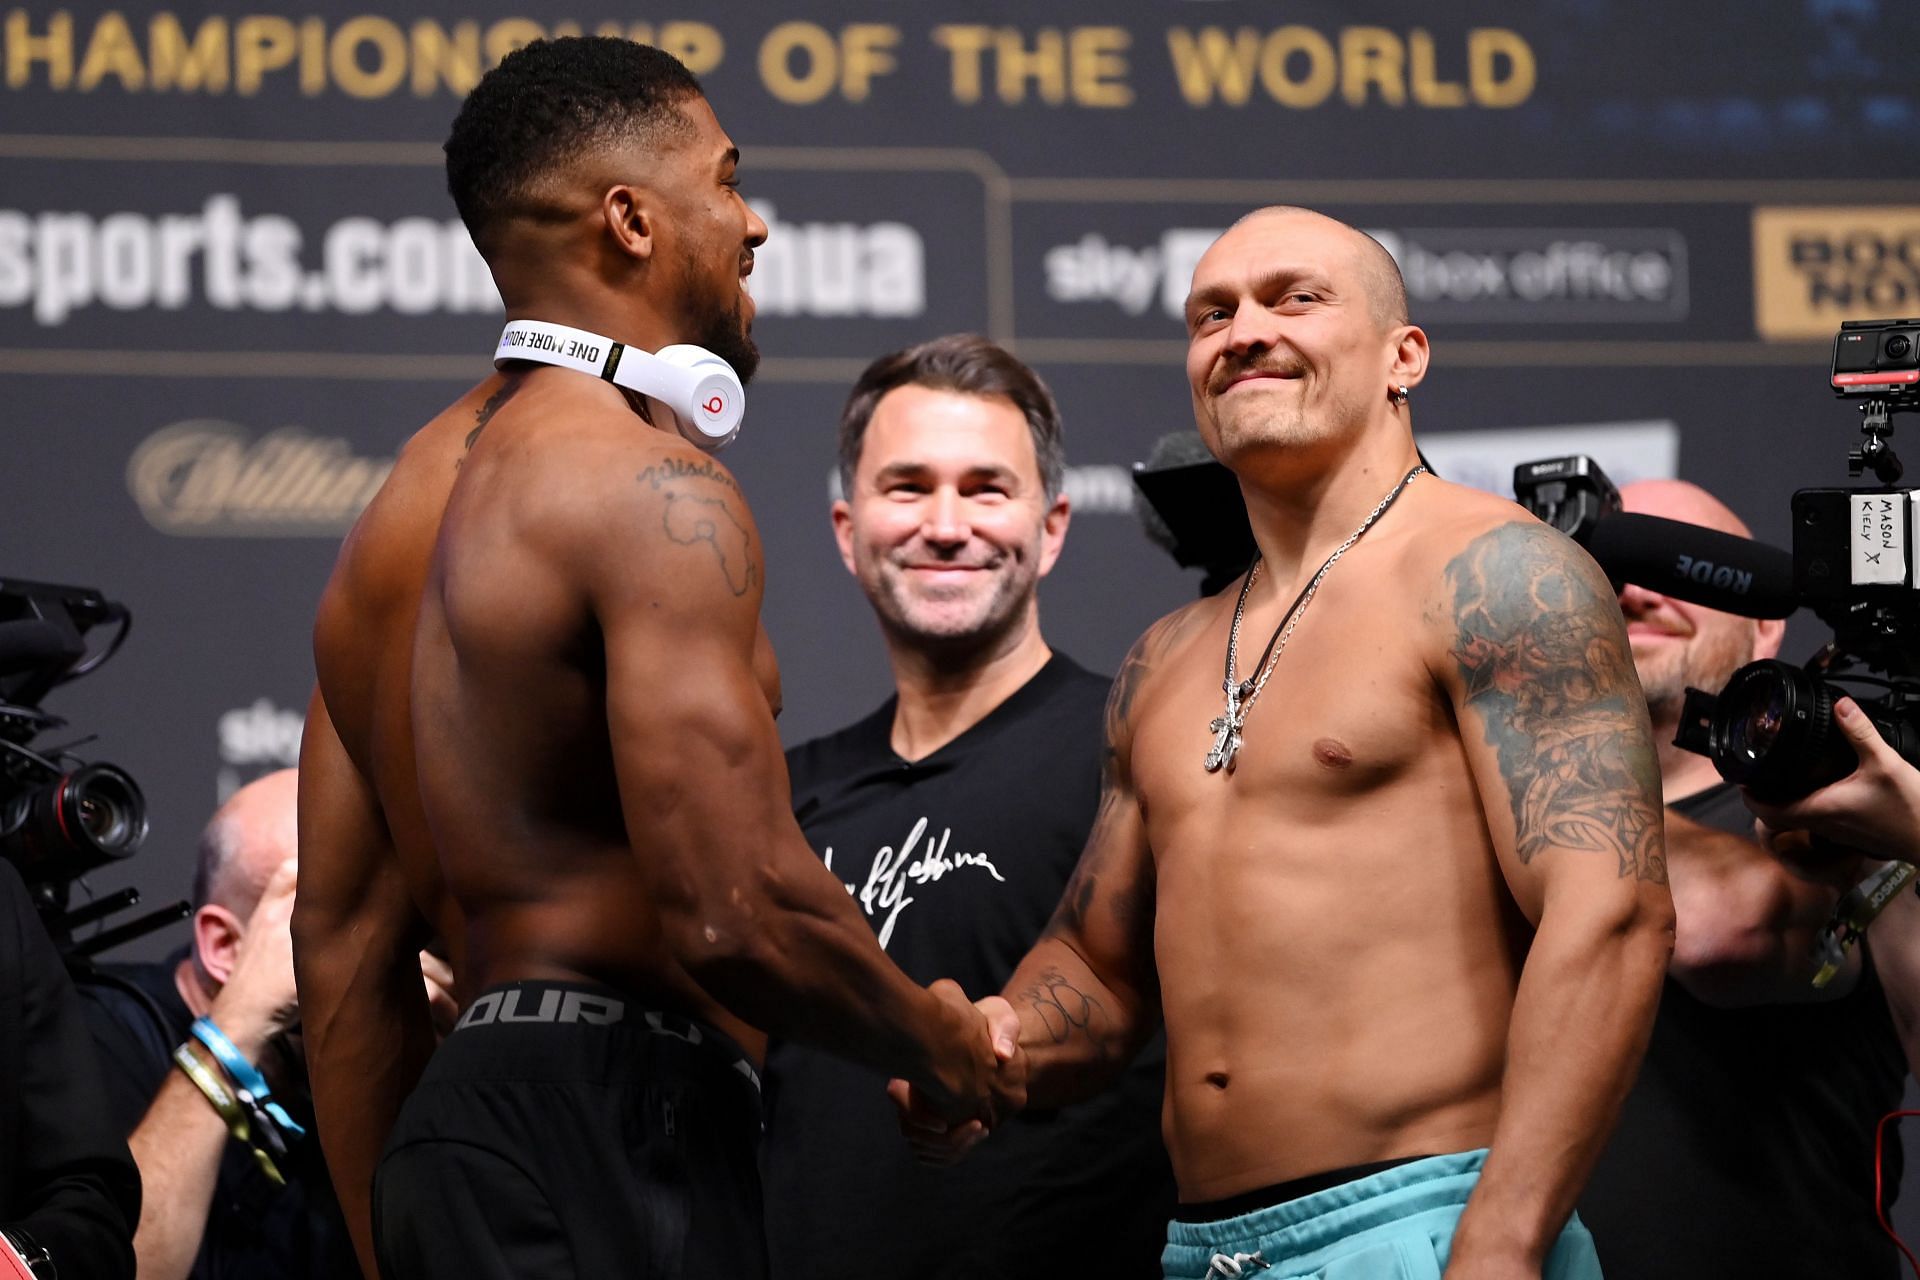 Anthony Joshua (L) and Oleksandr Usyk (R) might not fight next according to Eddie Hearn (M)